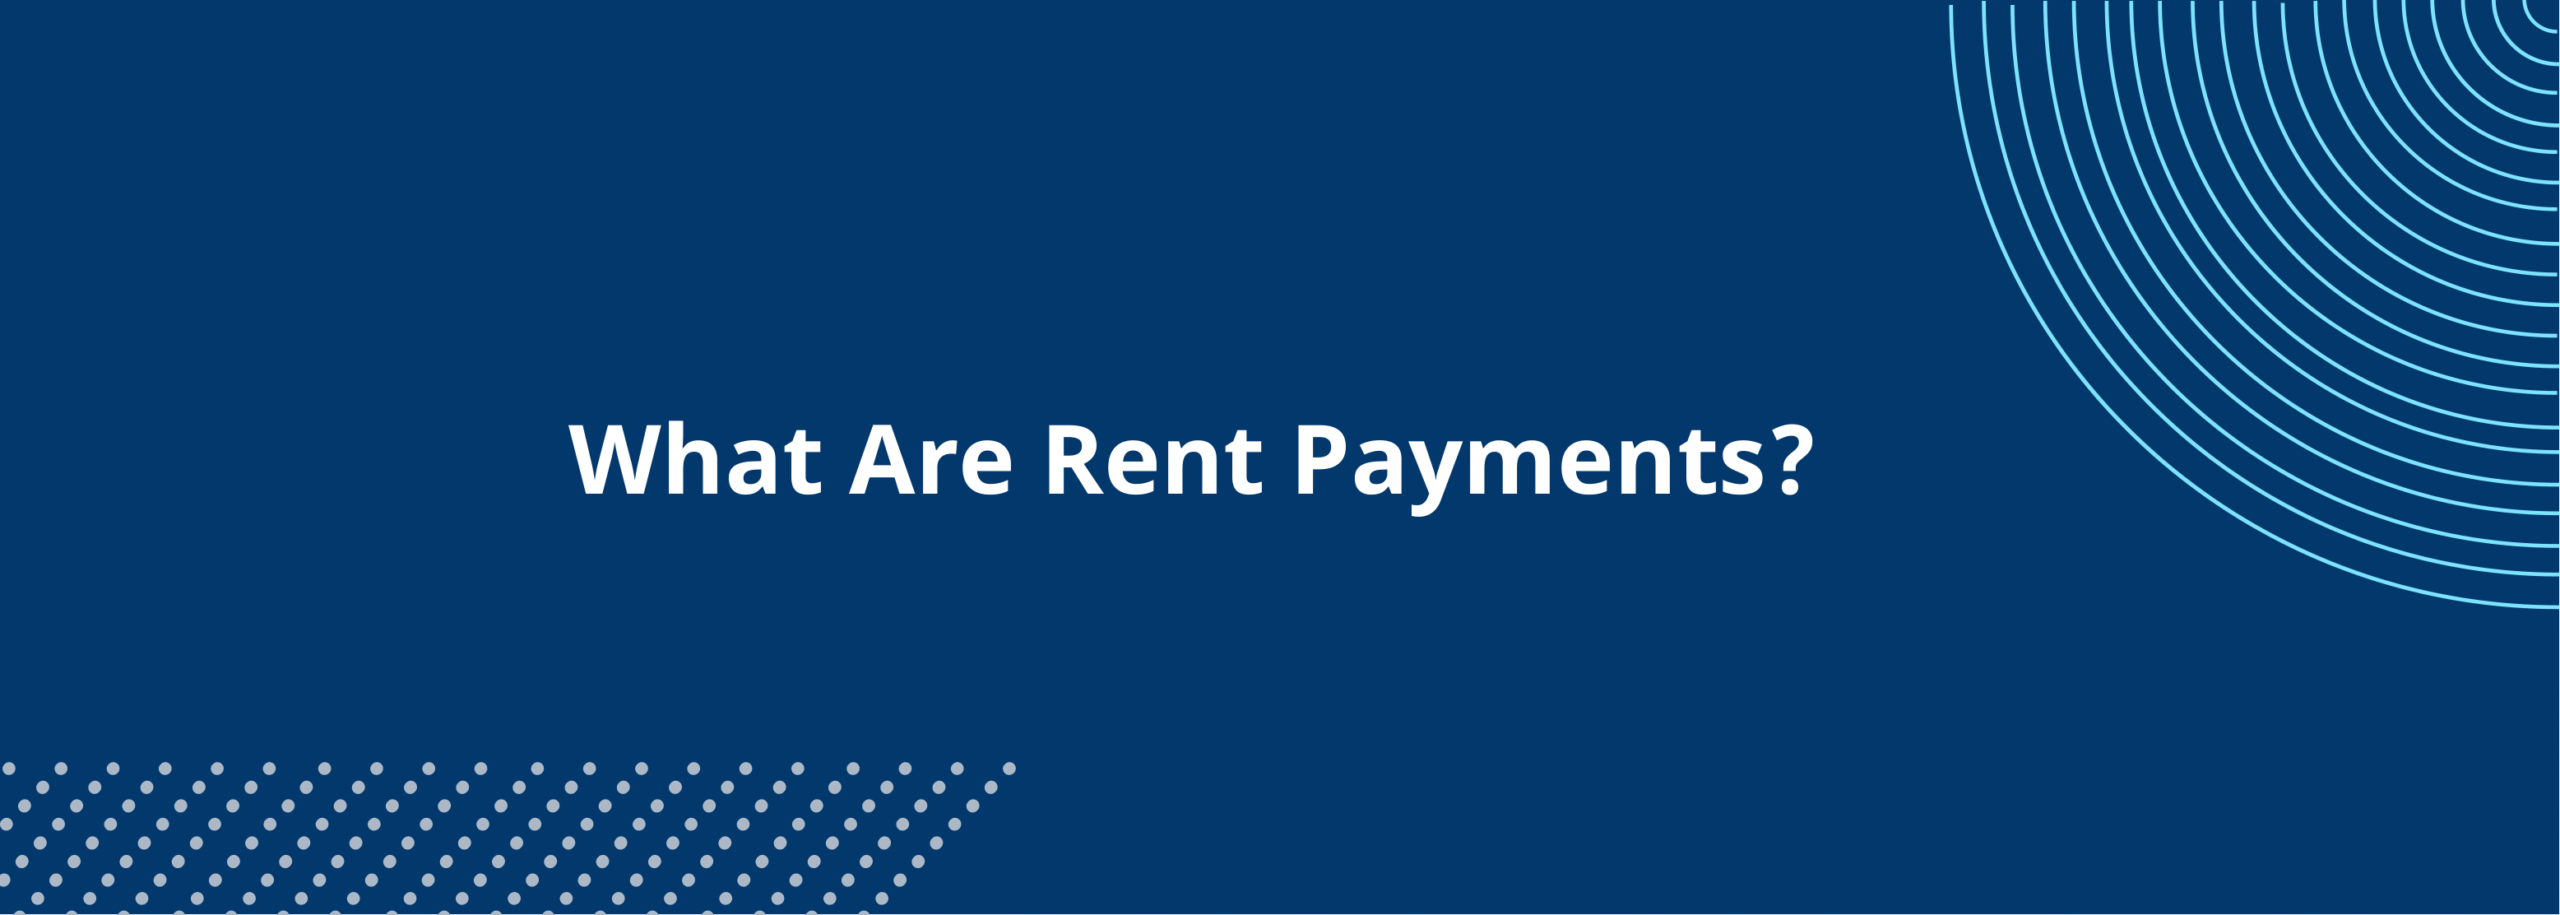 A rent payment is a monthly fee paid by the tenant to their landlord or property manager in accordance with their lease agreement.